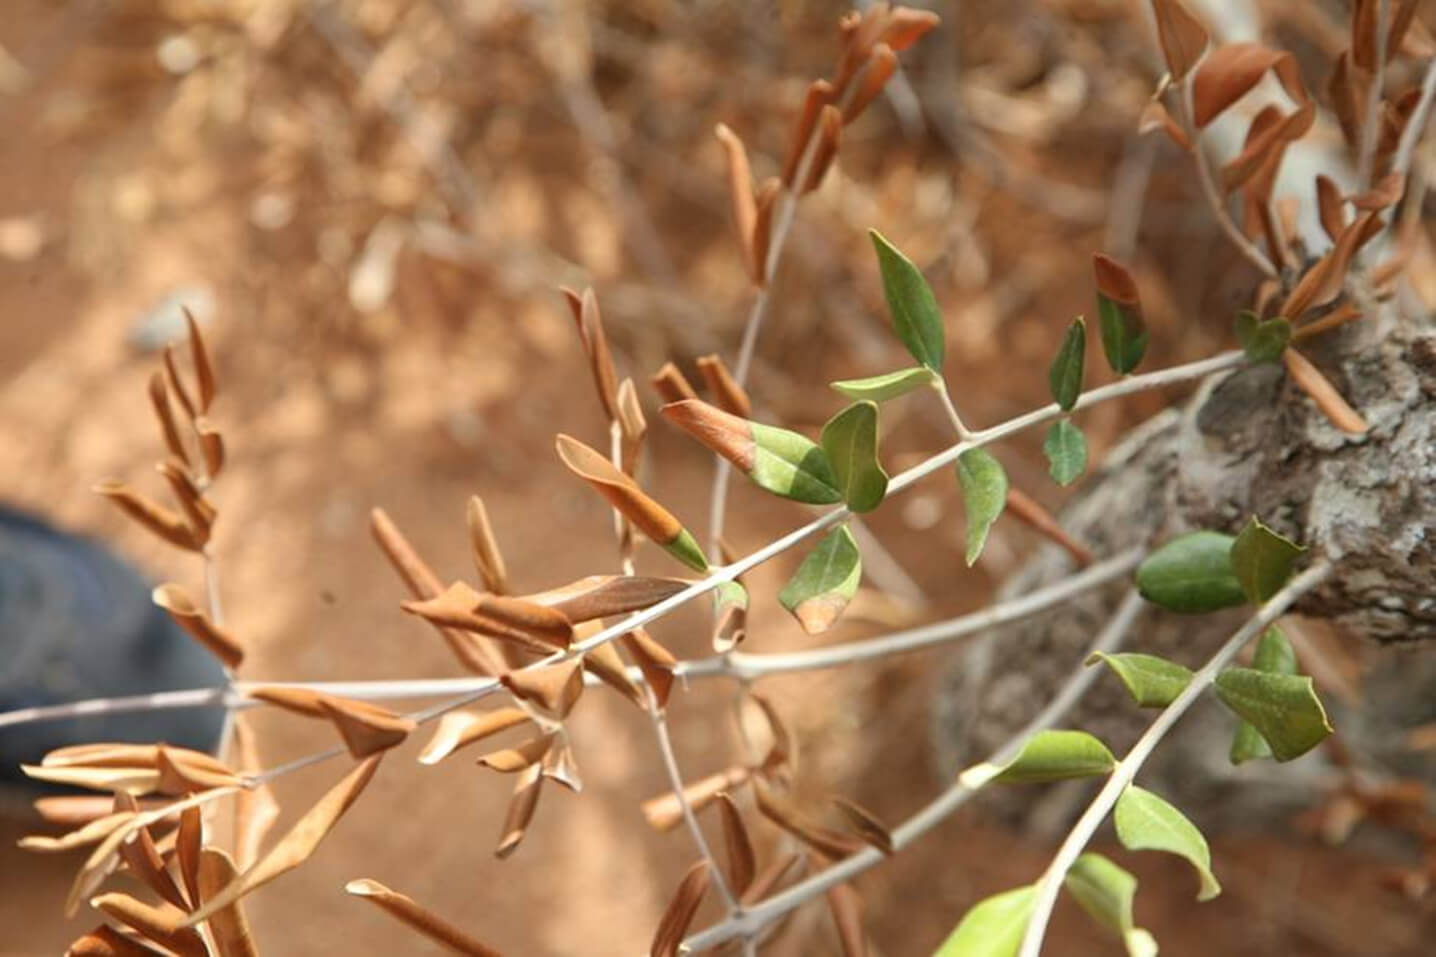 A plant devastated by Xylella fastidiosa. Photo: European and Mediterranean Plant Protection Organisation.